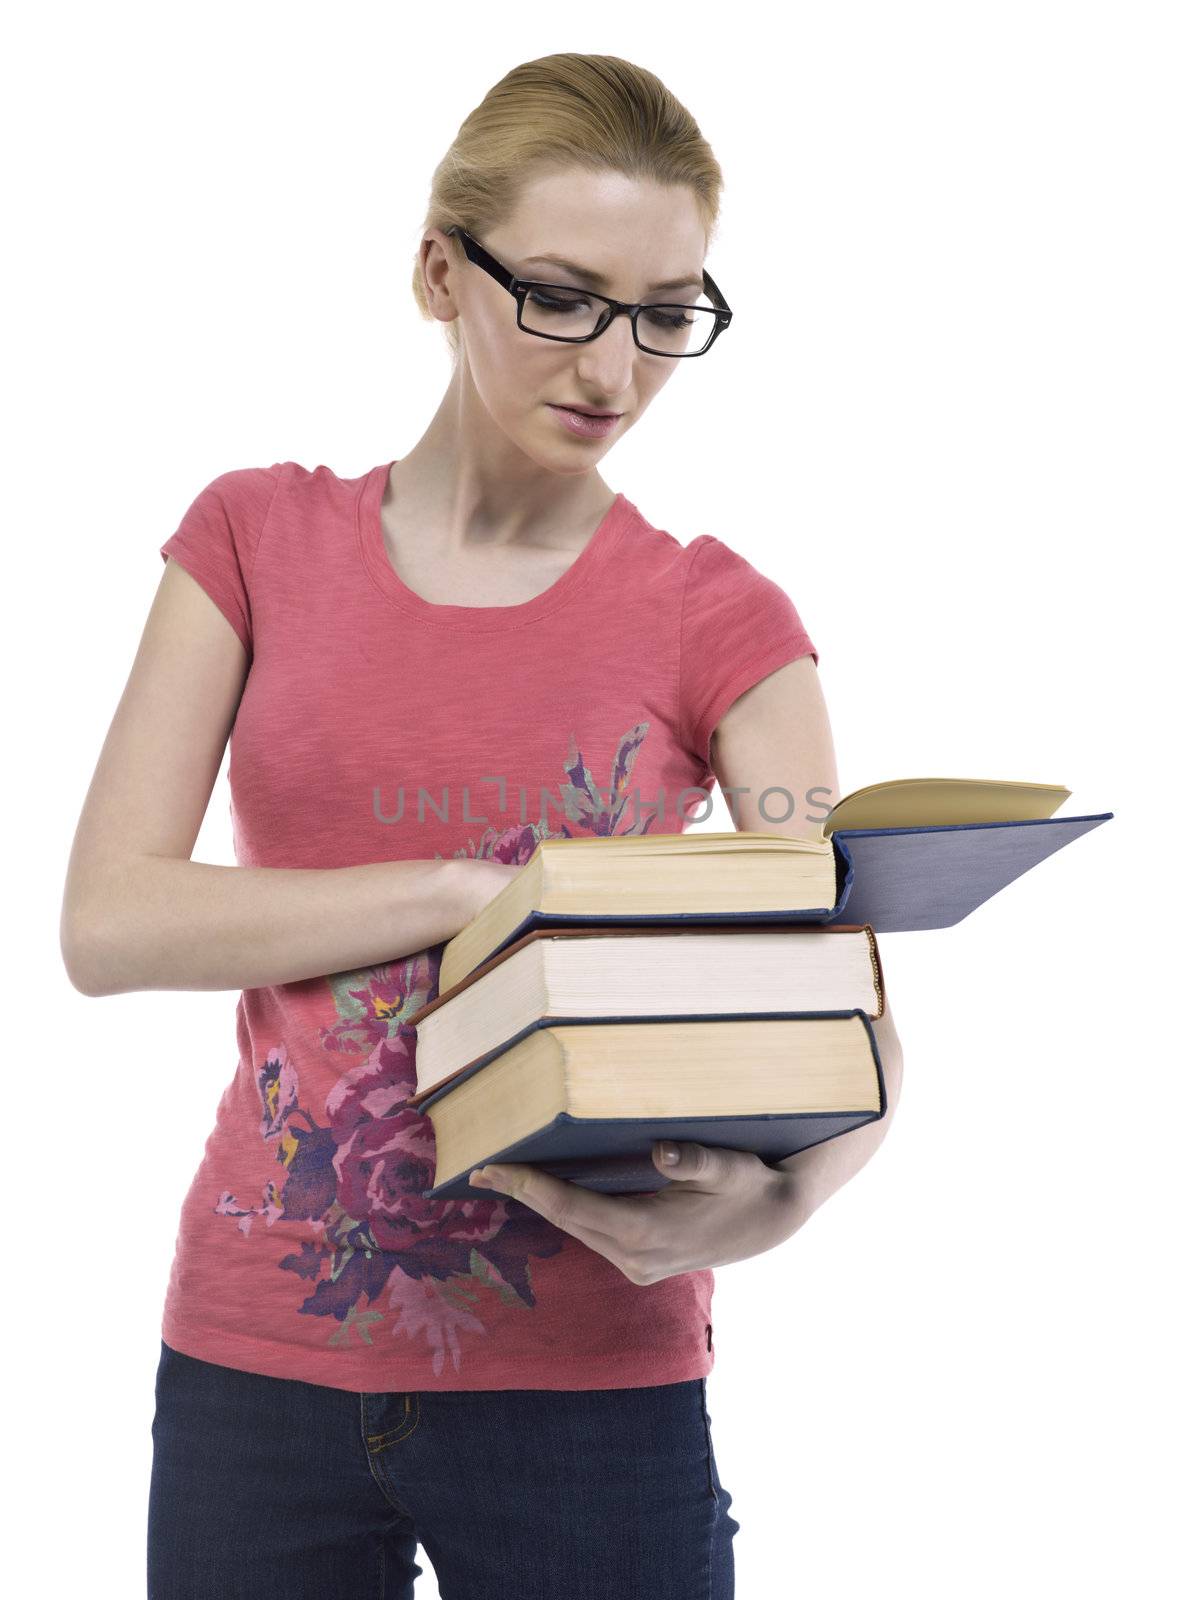 Close-up image of a female student reading book against the white surface